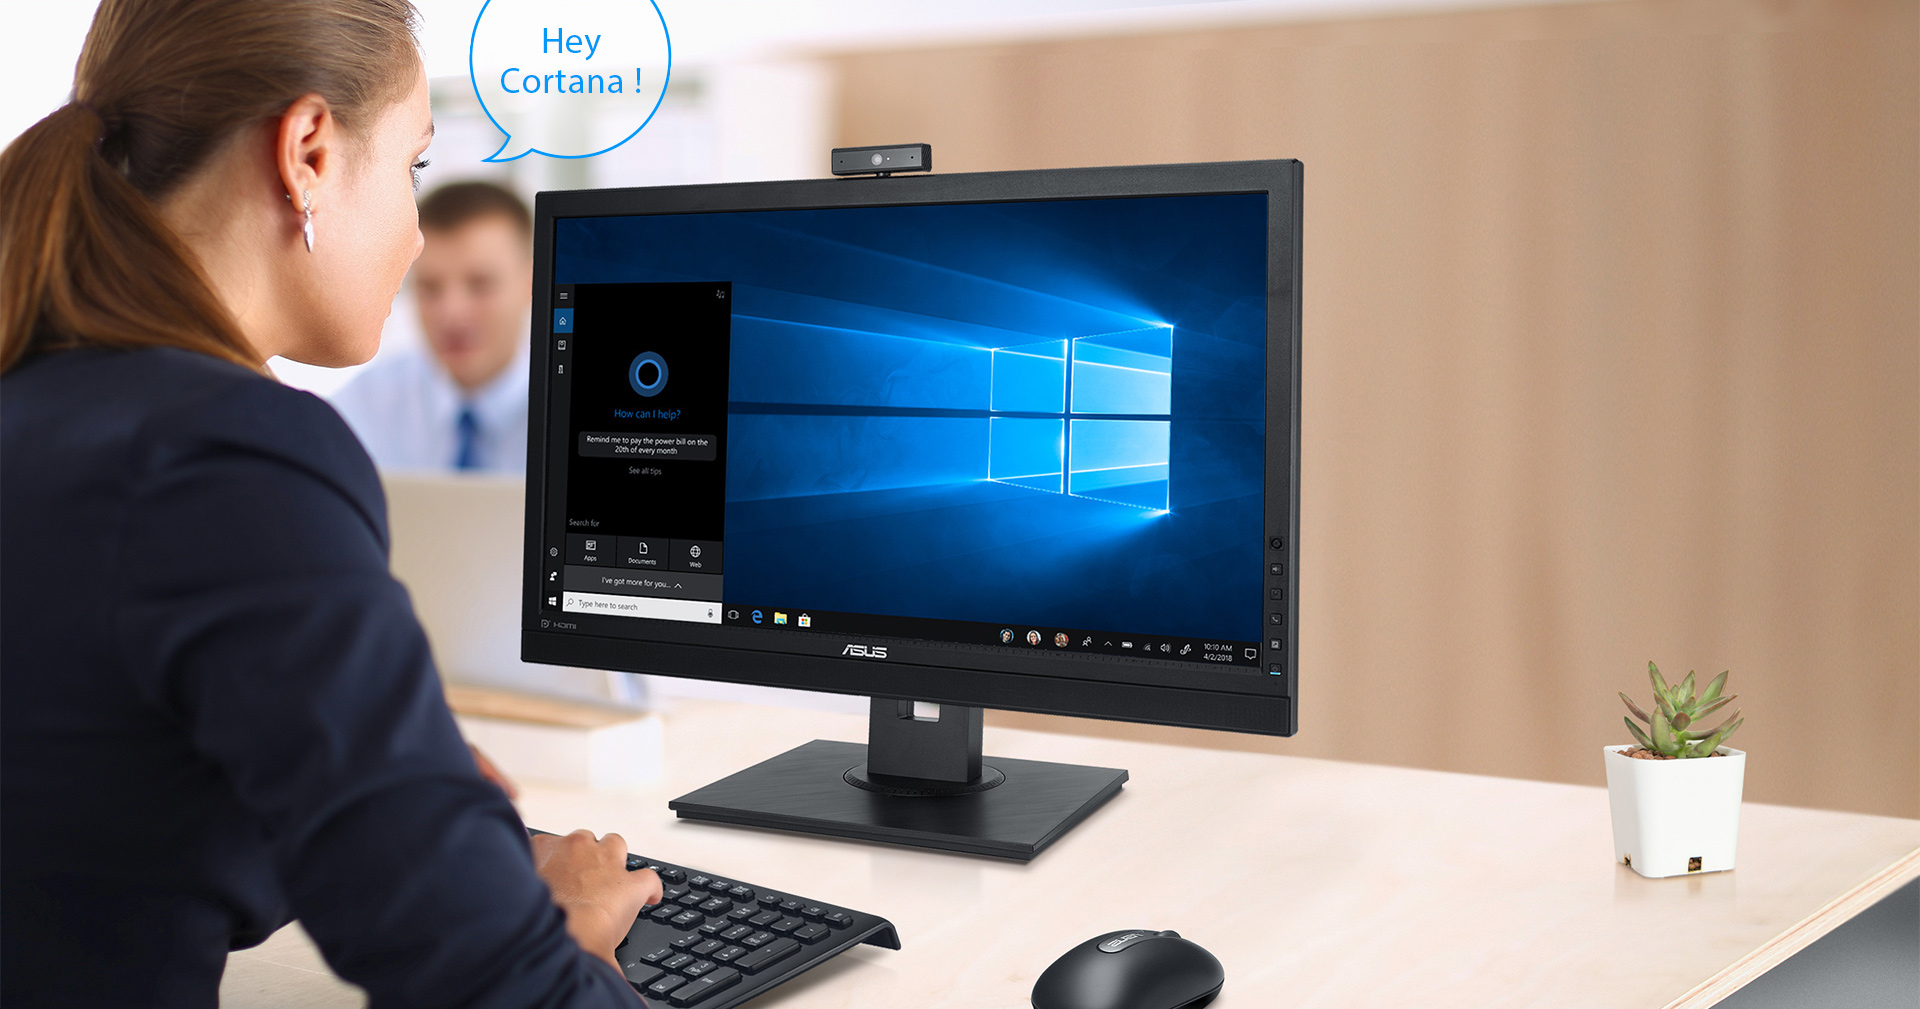 BE24EQSK's beam-forming microphone array separates speech from background noise, so it's perfect for use with Cortana, the Windows 10 smart assistant.